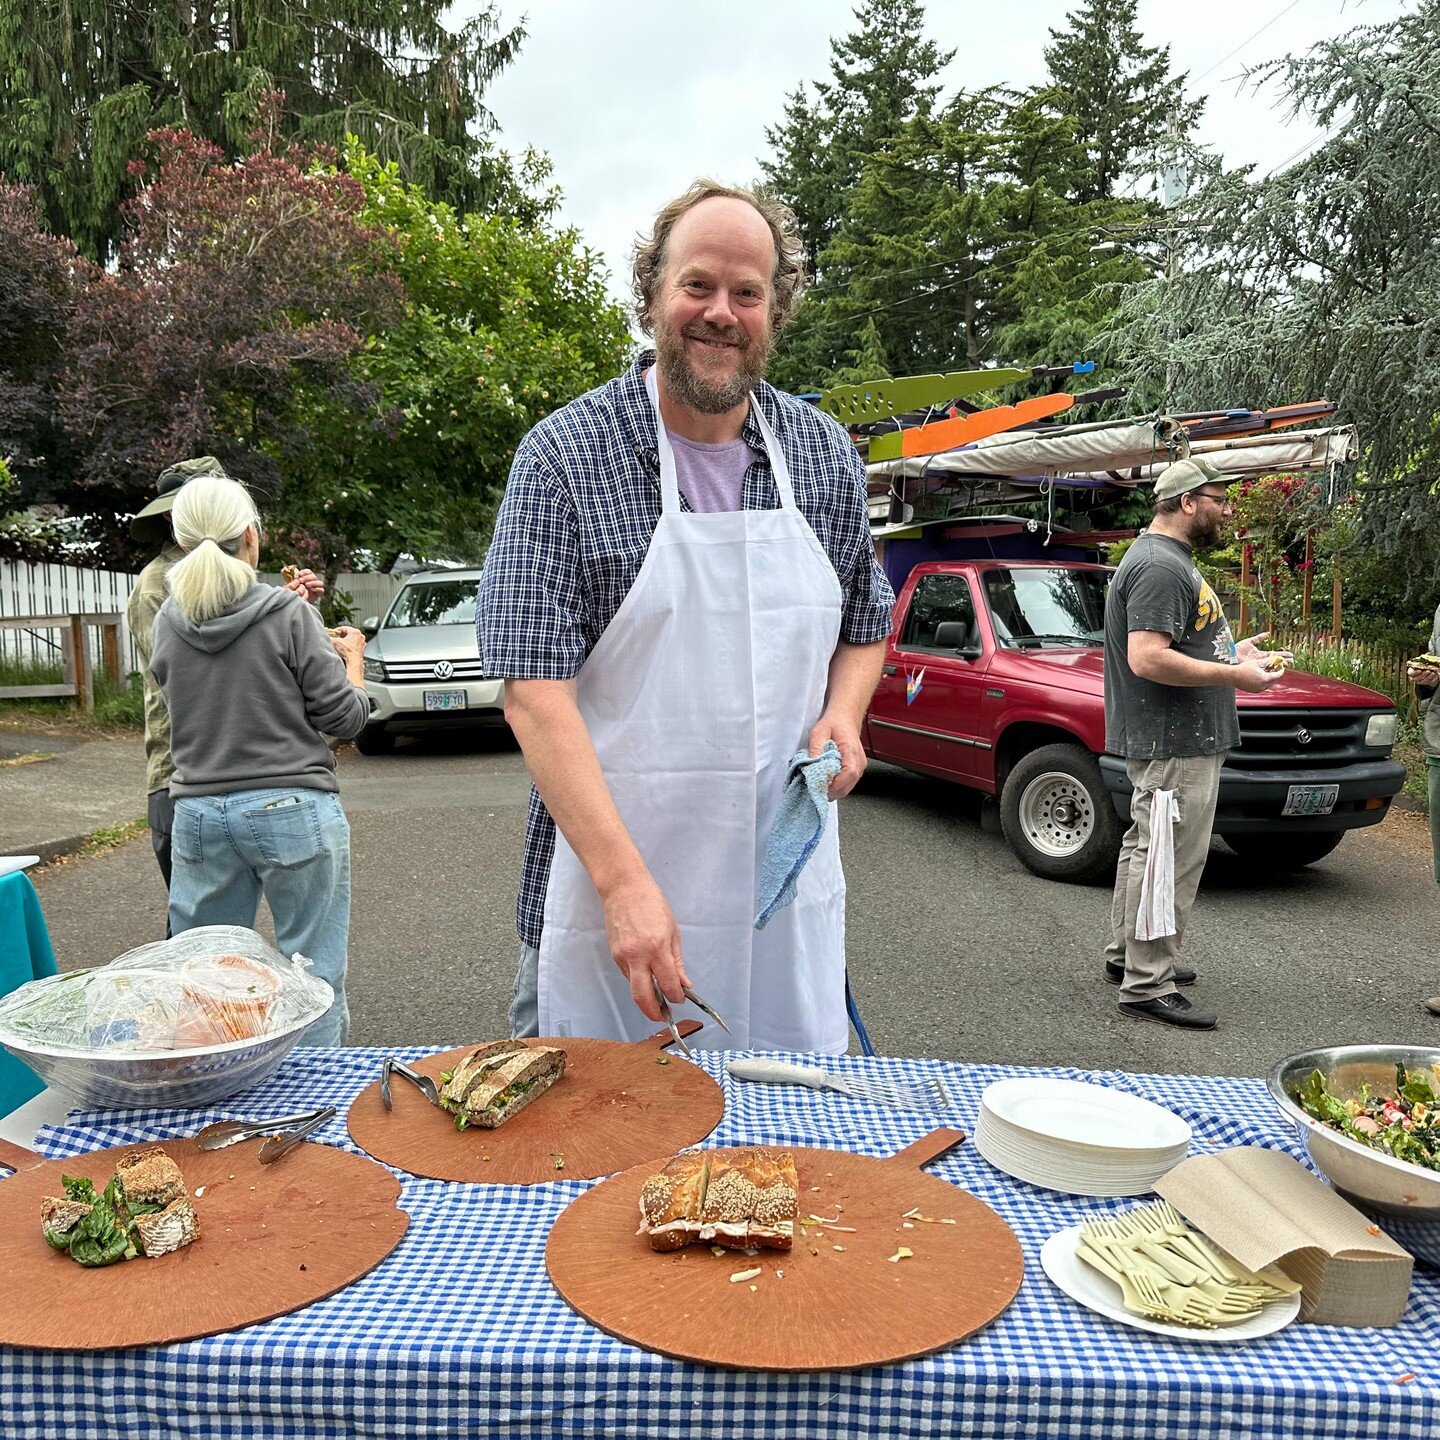 Thanks to Mark from Tastebud for generously serving up delicious donated sandwiches, breads and salads for our 50 volunteers last Saturday for the mural painting! @tastebudpdx 

@TastebudPDX @cityrepairproject @multnomahvillagepdx 

Contact: communit